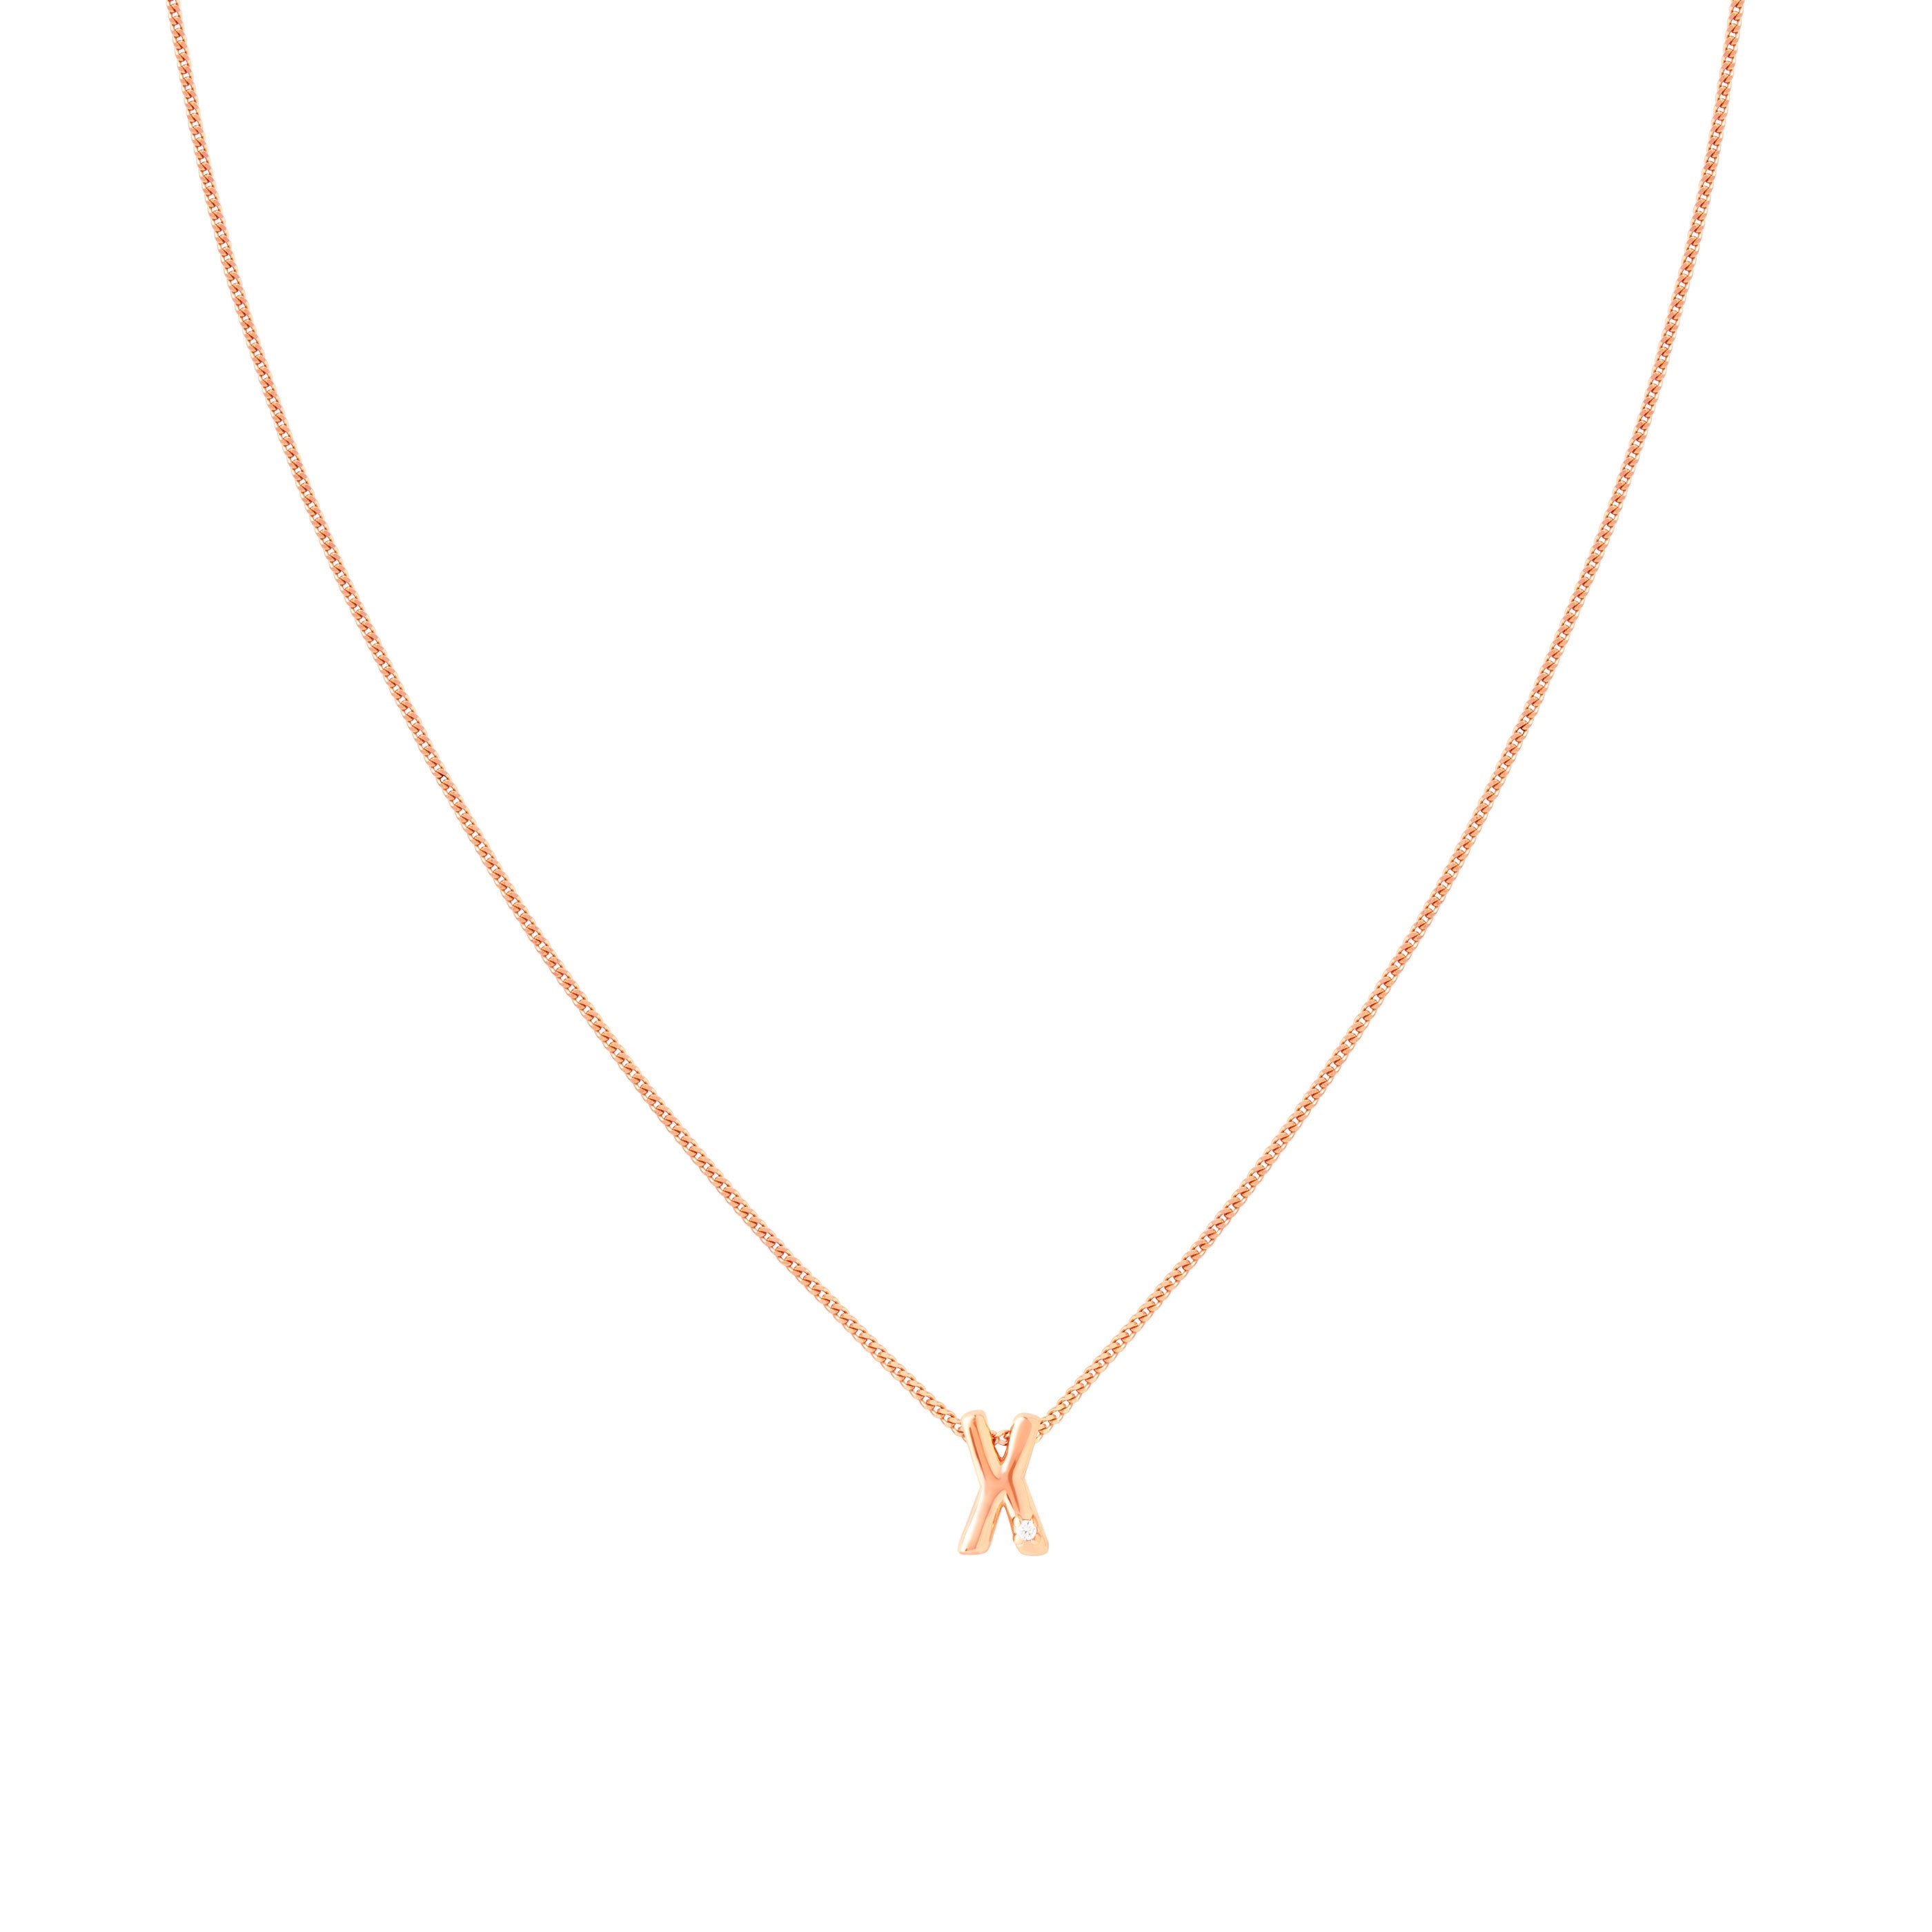 X Initial Pendant Necklace in Rose Gold